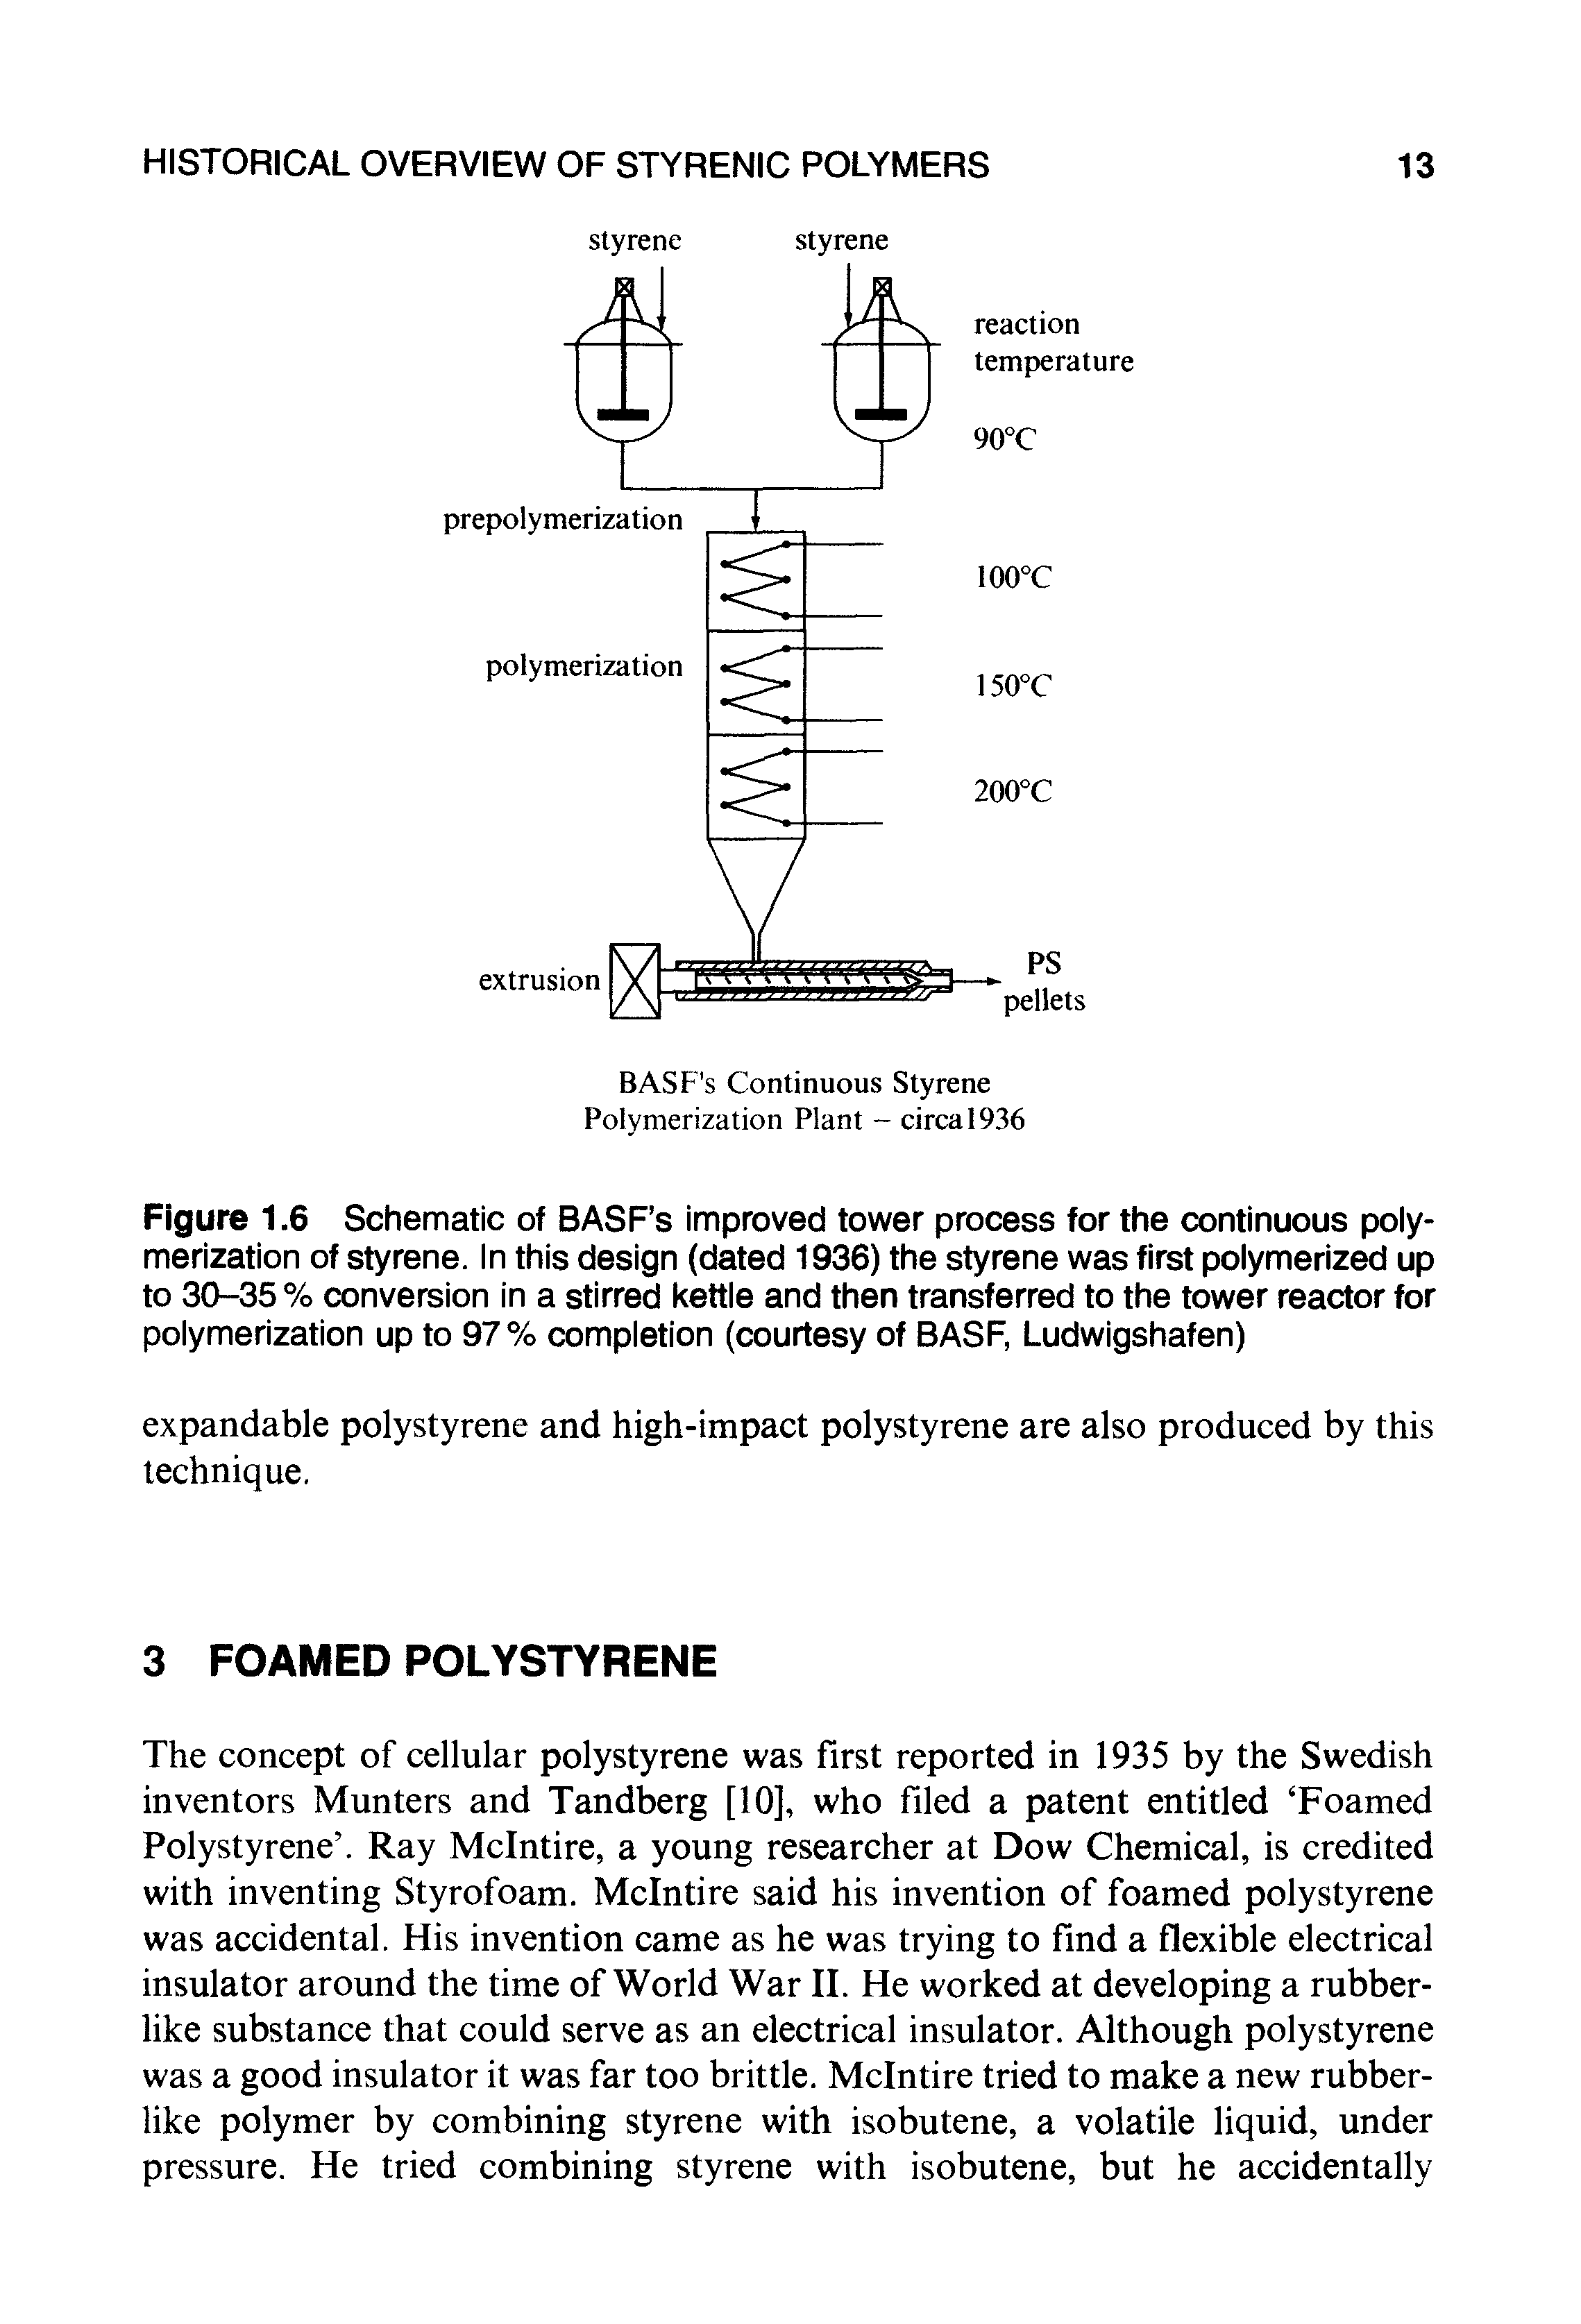 Figure 1.6 Schematic of BASF s improved tower process for the continuous polymerization of styrene. In this design (dated 1936) the styrene was first polymerized up to 30-35% conversion in a stirred kettle and then transferred to the tower reactor for polymerization up to 97% completion (courtesy of BASF, Ludwigshafen)...